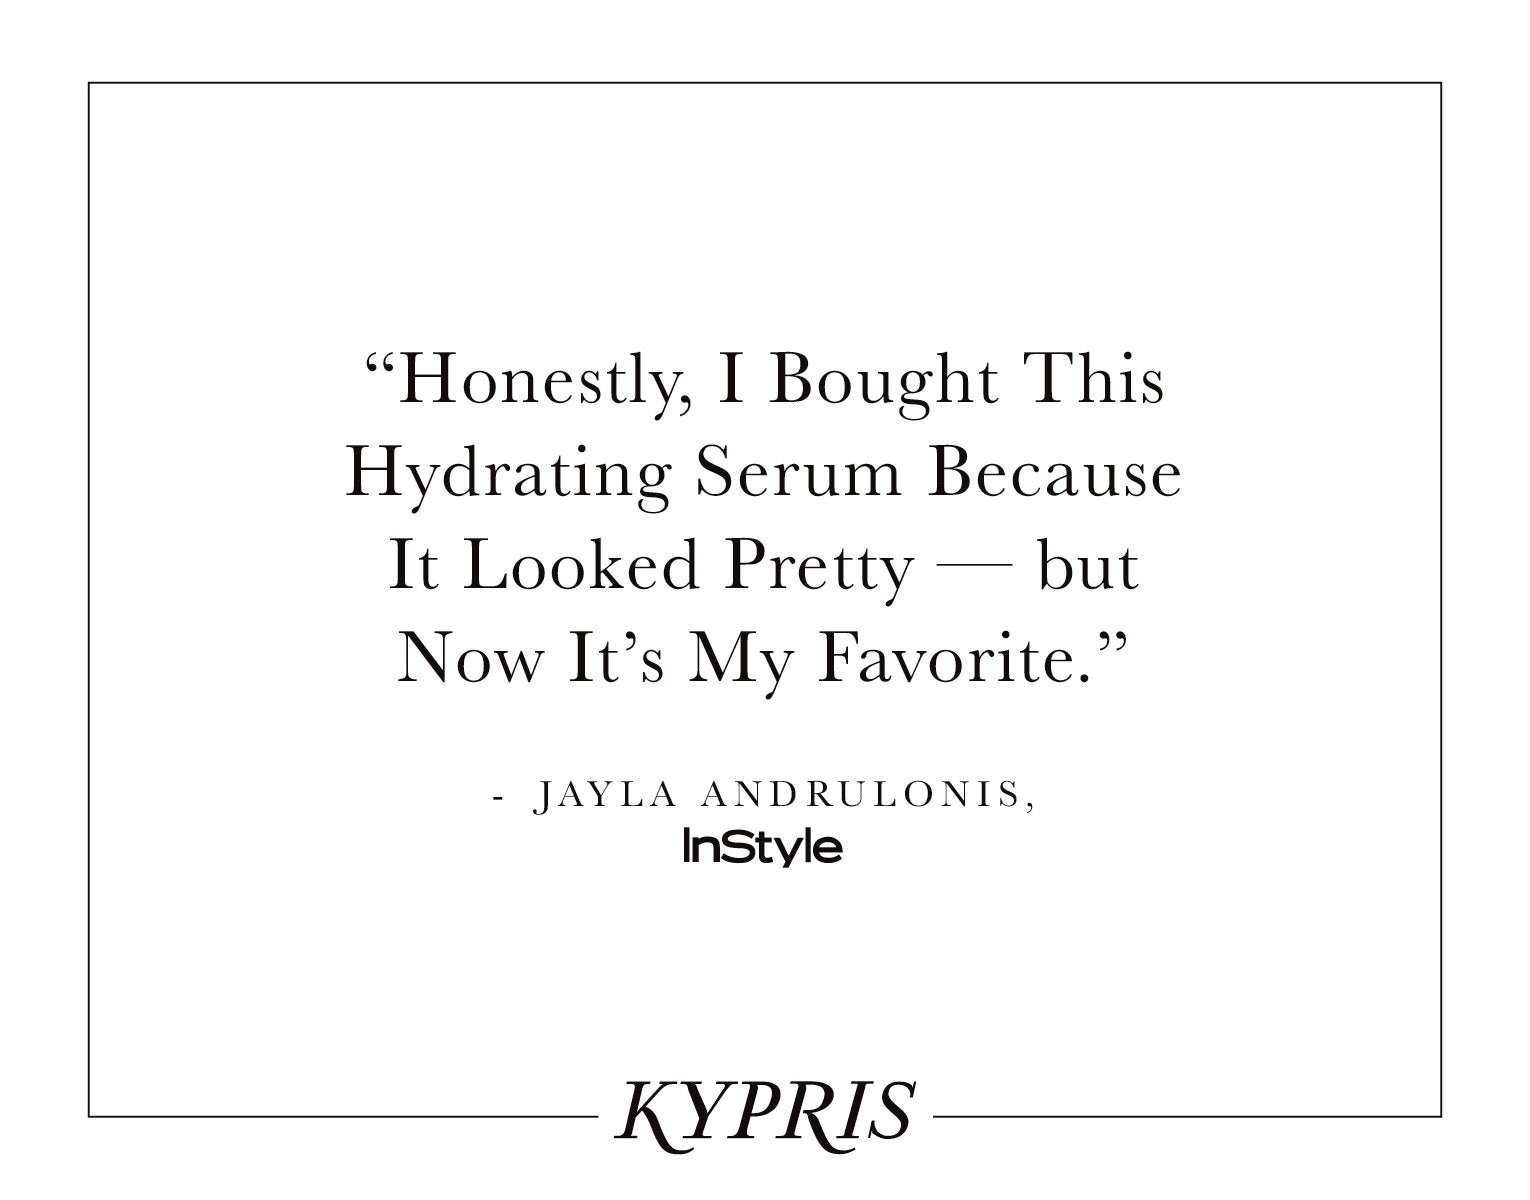 "Honestly, I bought this hydrating serum because it looked pretty- but now it's my favorite" Instyle